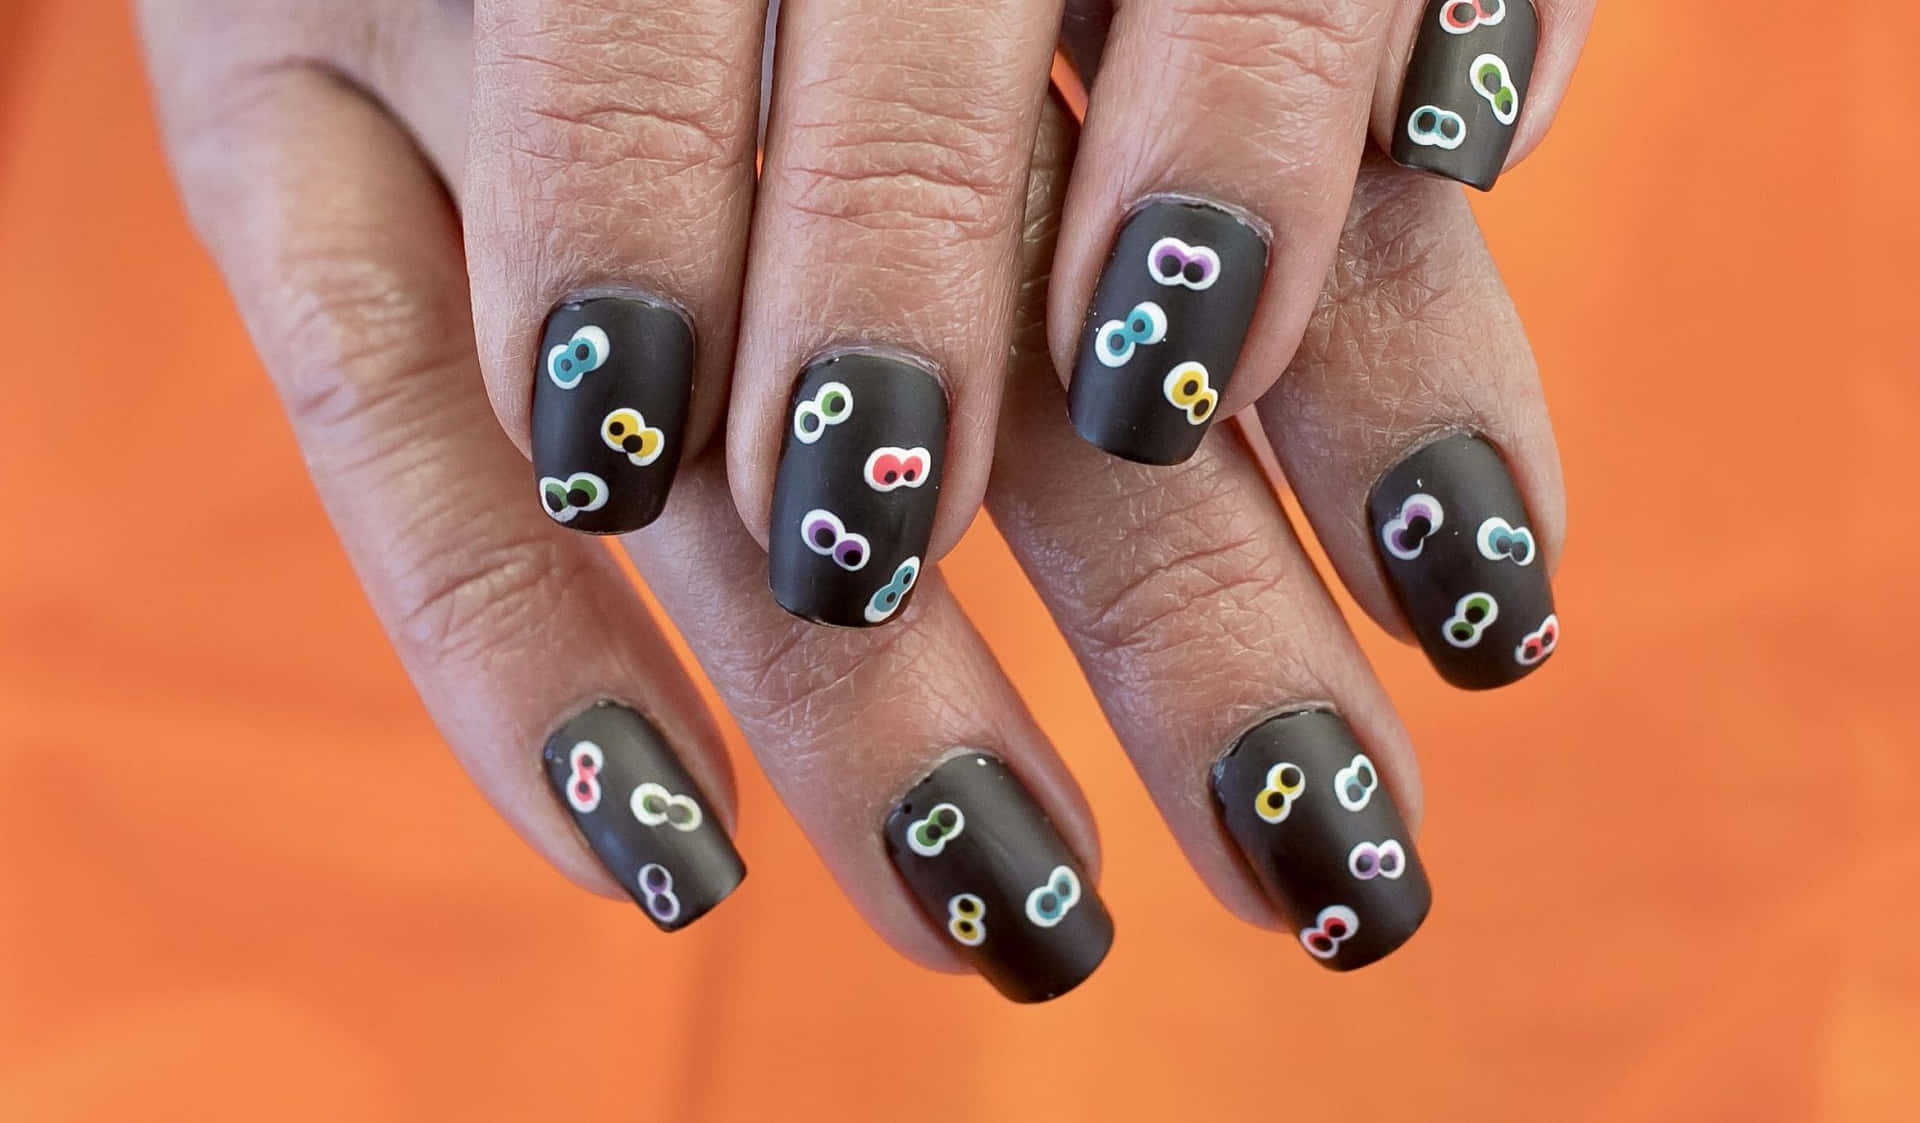 Get your nails ready for Halloween with this spooky nail art! Wallpaper